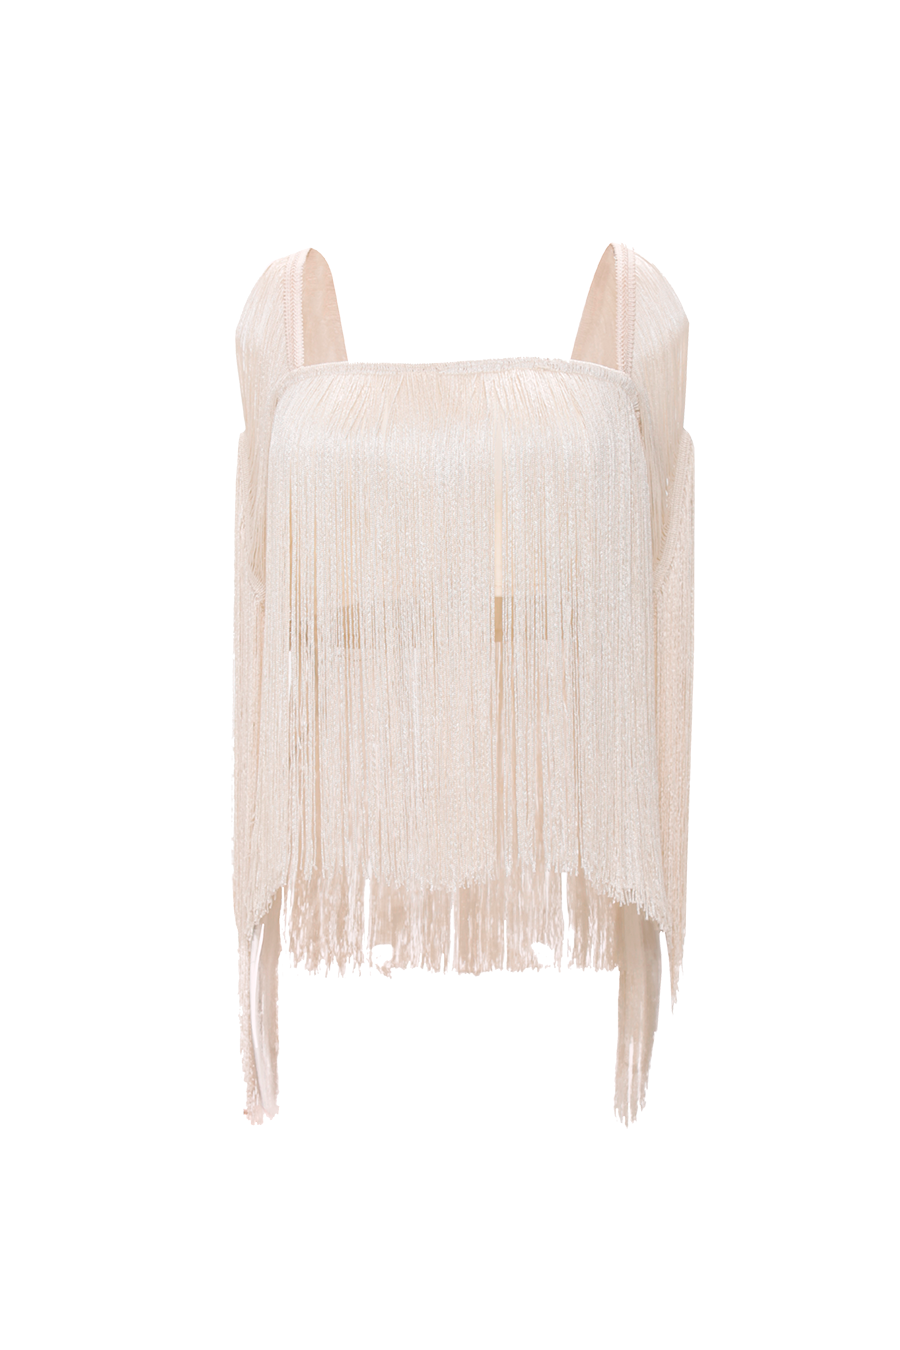 Ivory Poncho Coverup